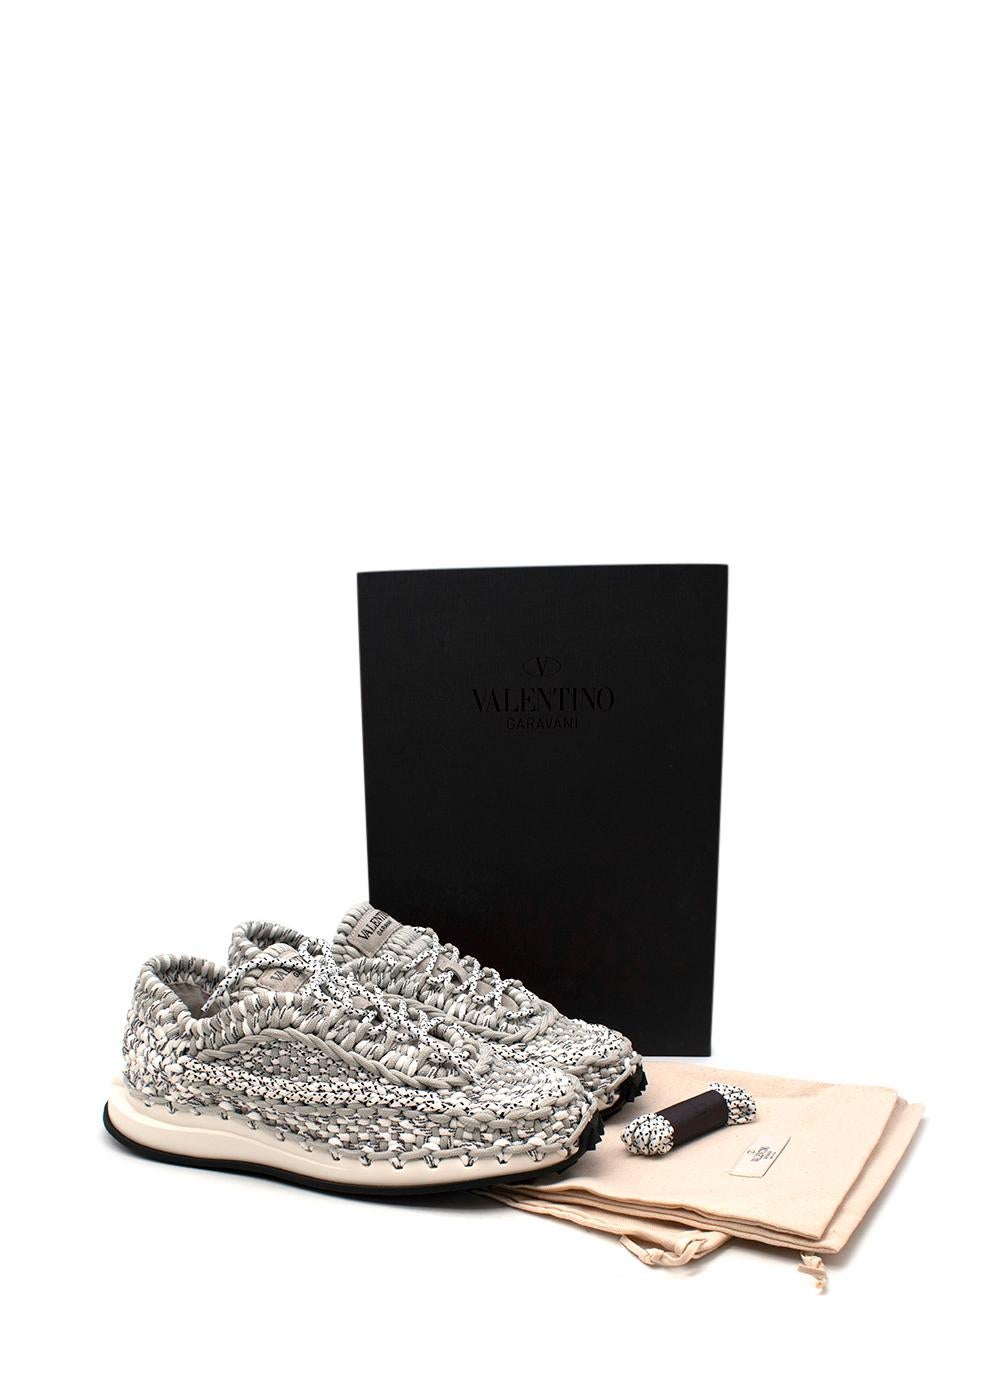 Valentino Grey Woven Cord Sneakers

- Macrame woven uppers in grey marl cord
- Light weight foam and rubber sole 
- Logo branding on the tongue

Materials 
Textile
Rubber

Made in Italy 

33cm Length 
13cm Width 
10cm Height

PLEASE NOTE, THESE